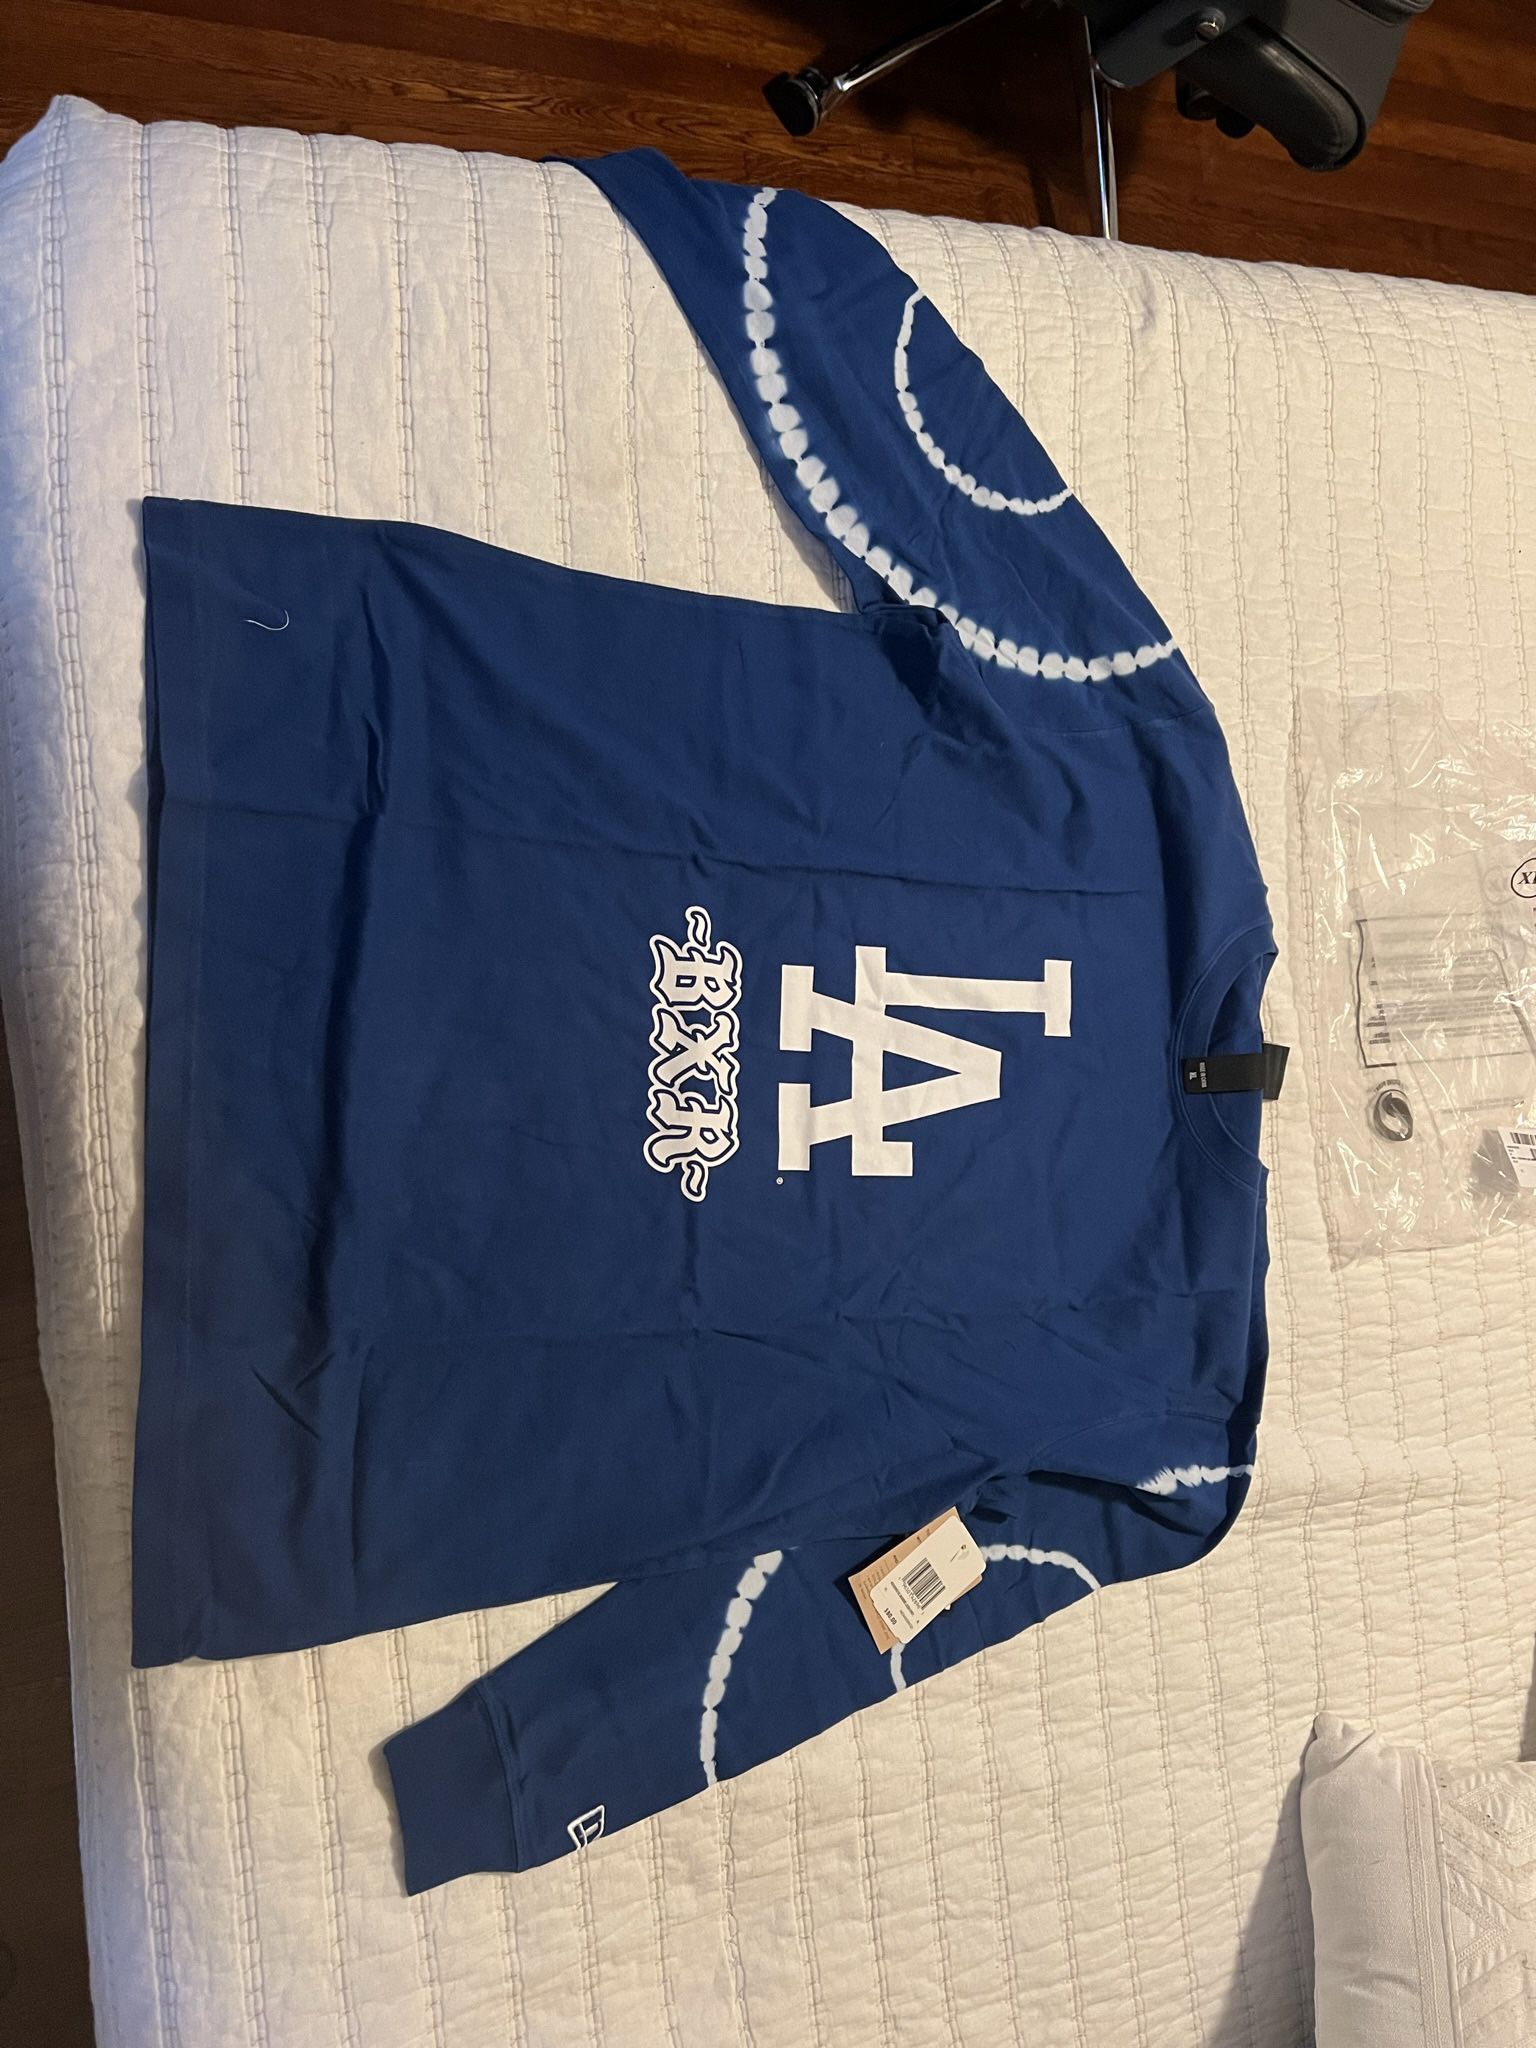 Born X Raised Dodgers Long Sleeve T-shirt for Sale in Downey, CA